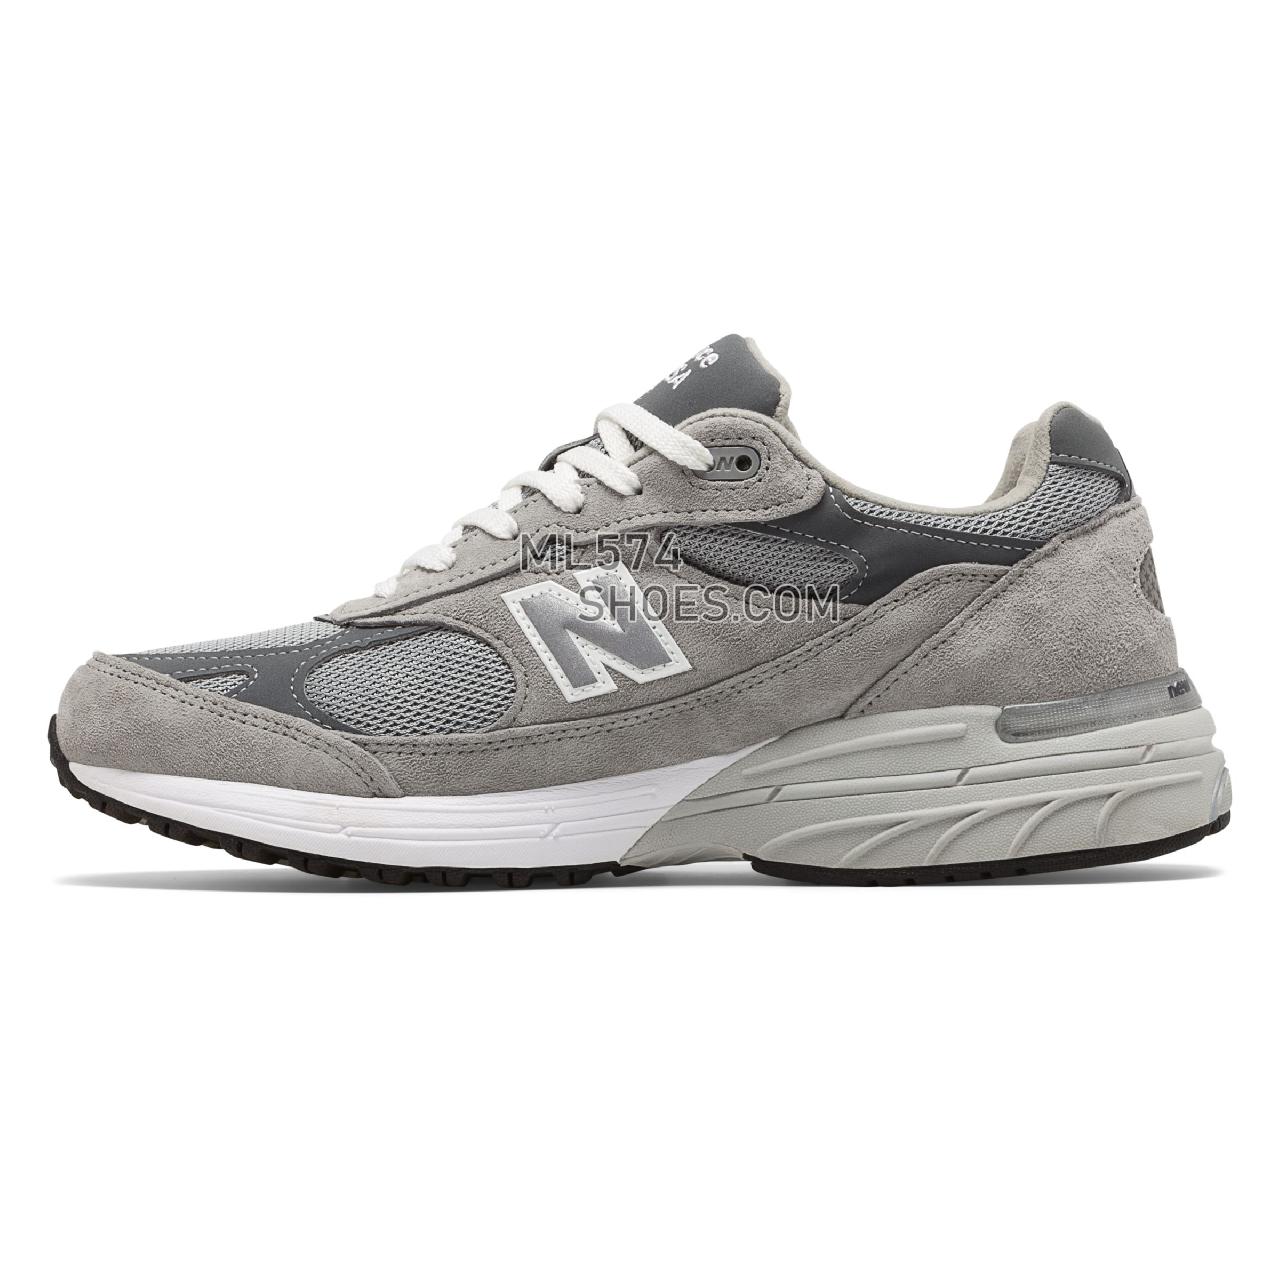 New Balance Made in US 993 - Men's Neutral Running - Grey with White - MR993GL